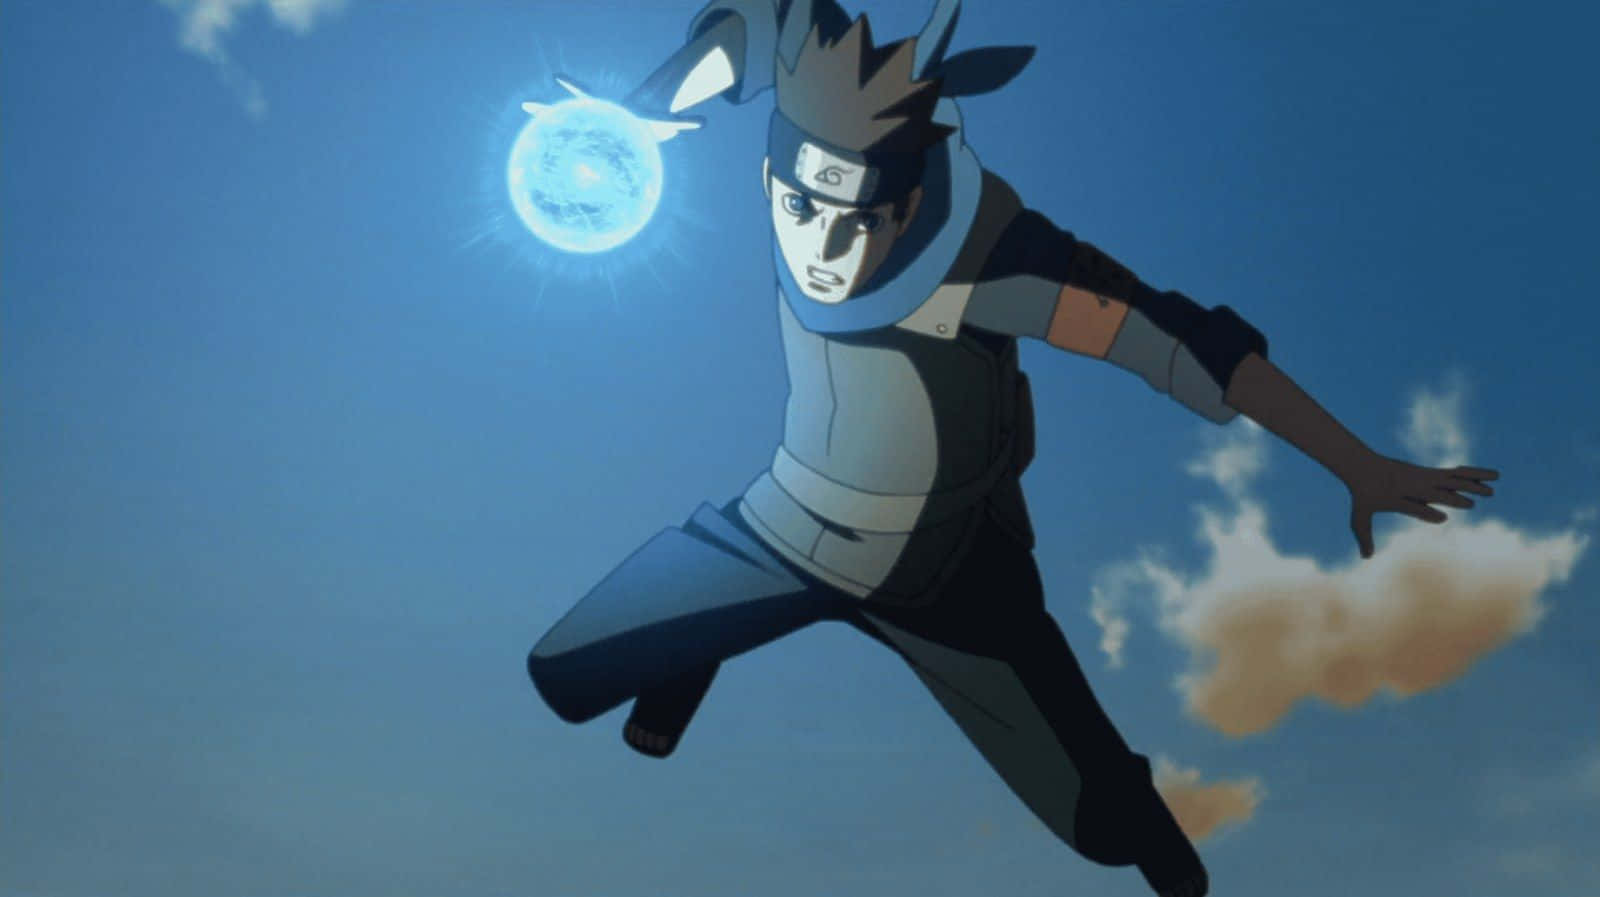 Konohamarusarutobi, En Dold Lövs Shinobi. (this Is A Direct Translation, But In The Context Of Computer Or Mobile Wallpaper, It Might Be More Appropriate To Use A Different Phrasing, Such As 